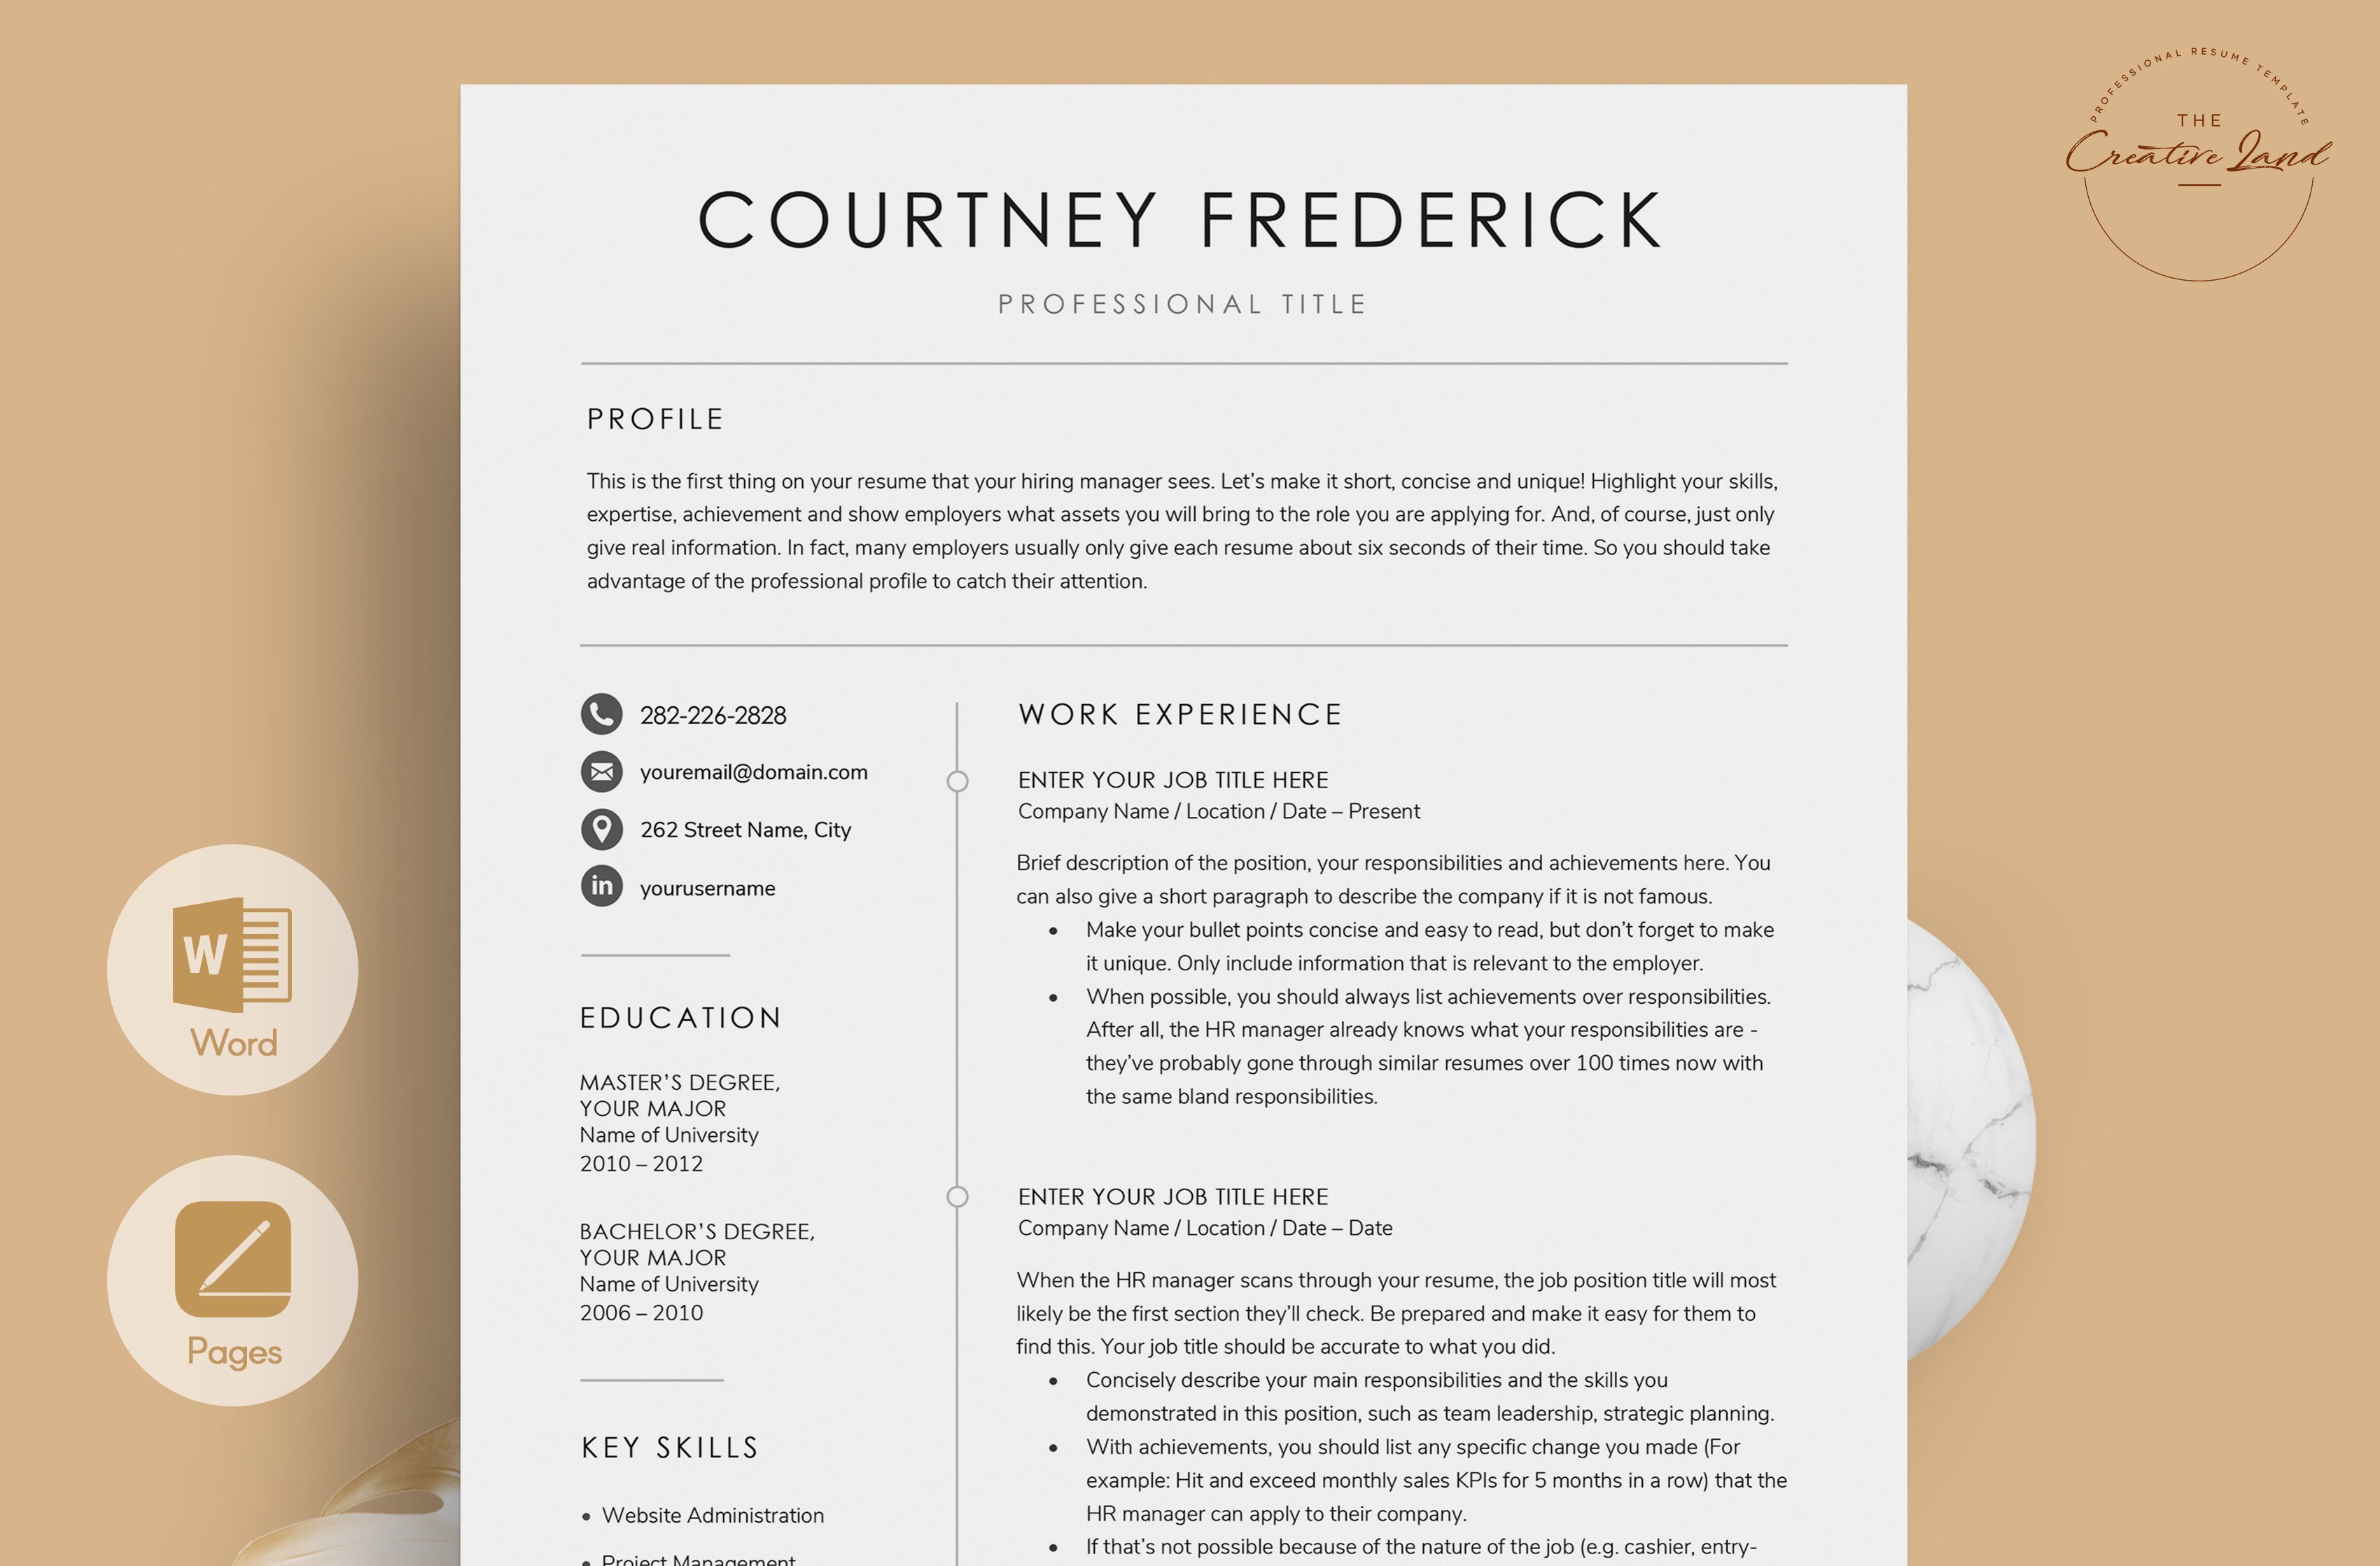 Resume/CV - The Courtney cover image.